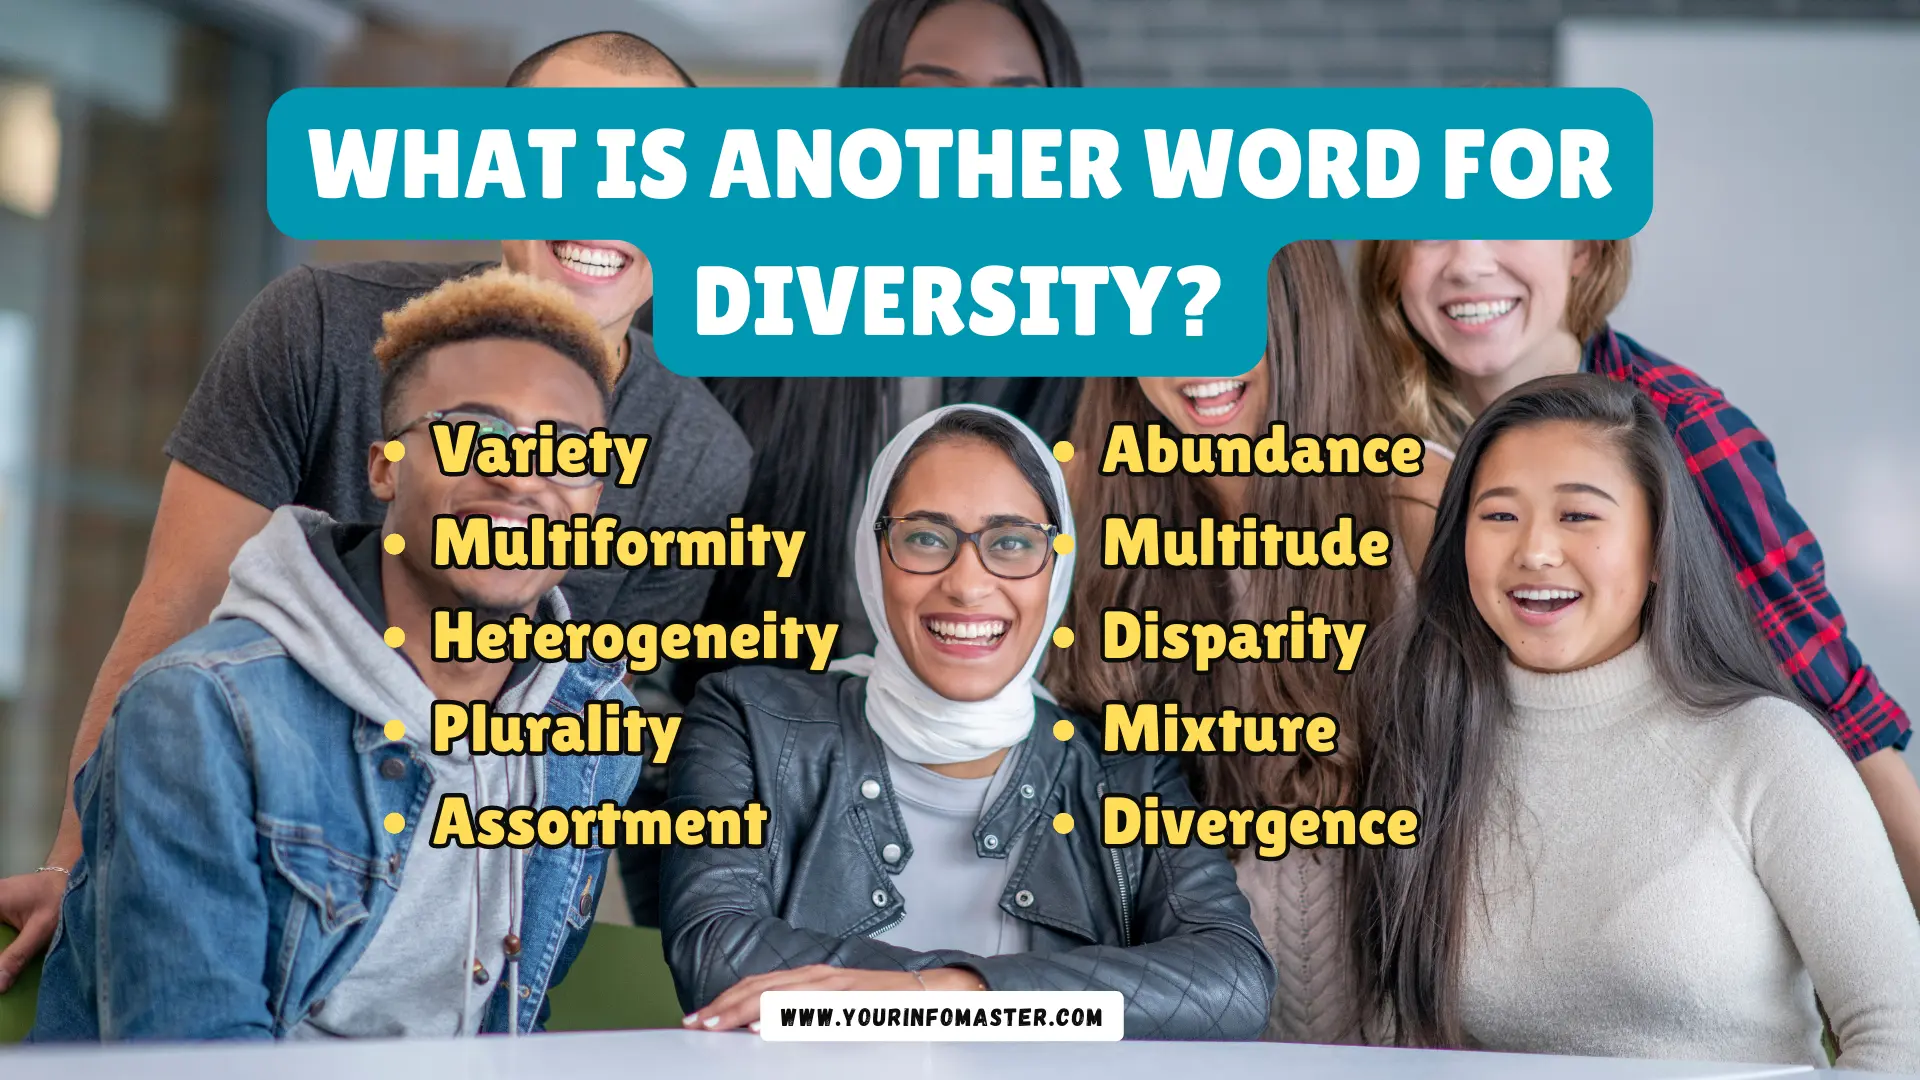 What is another word for Diversity